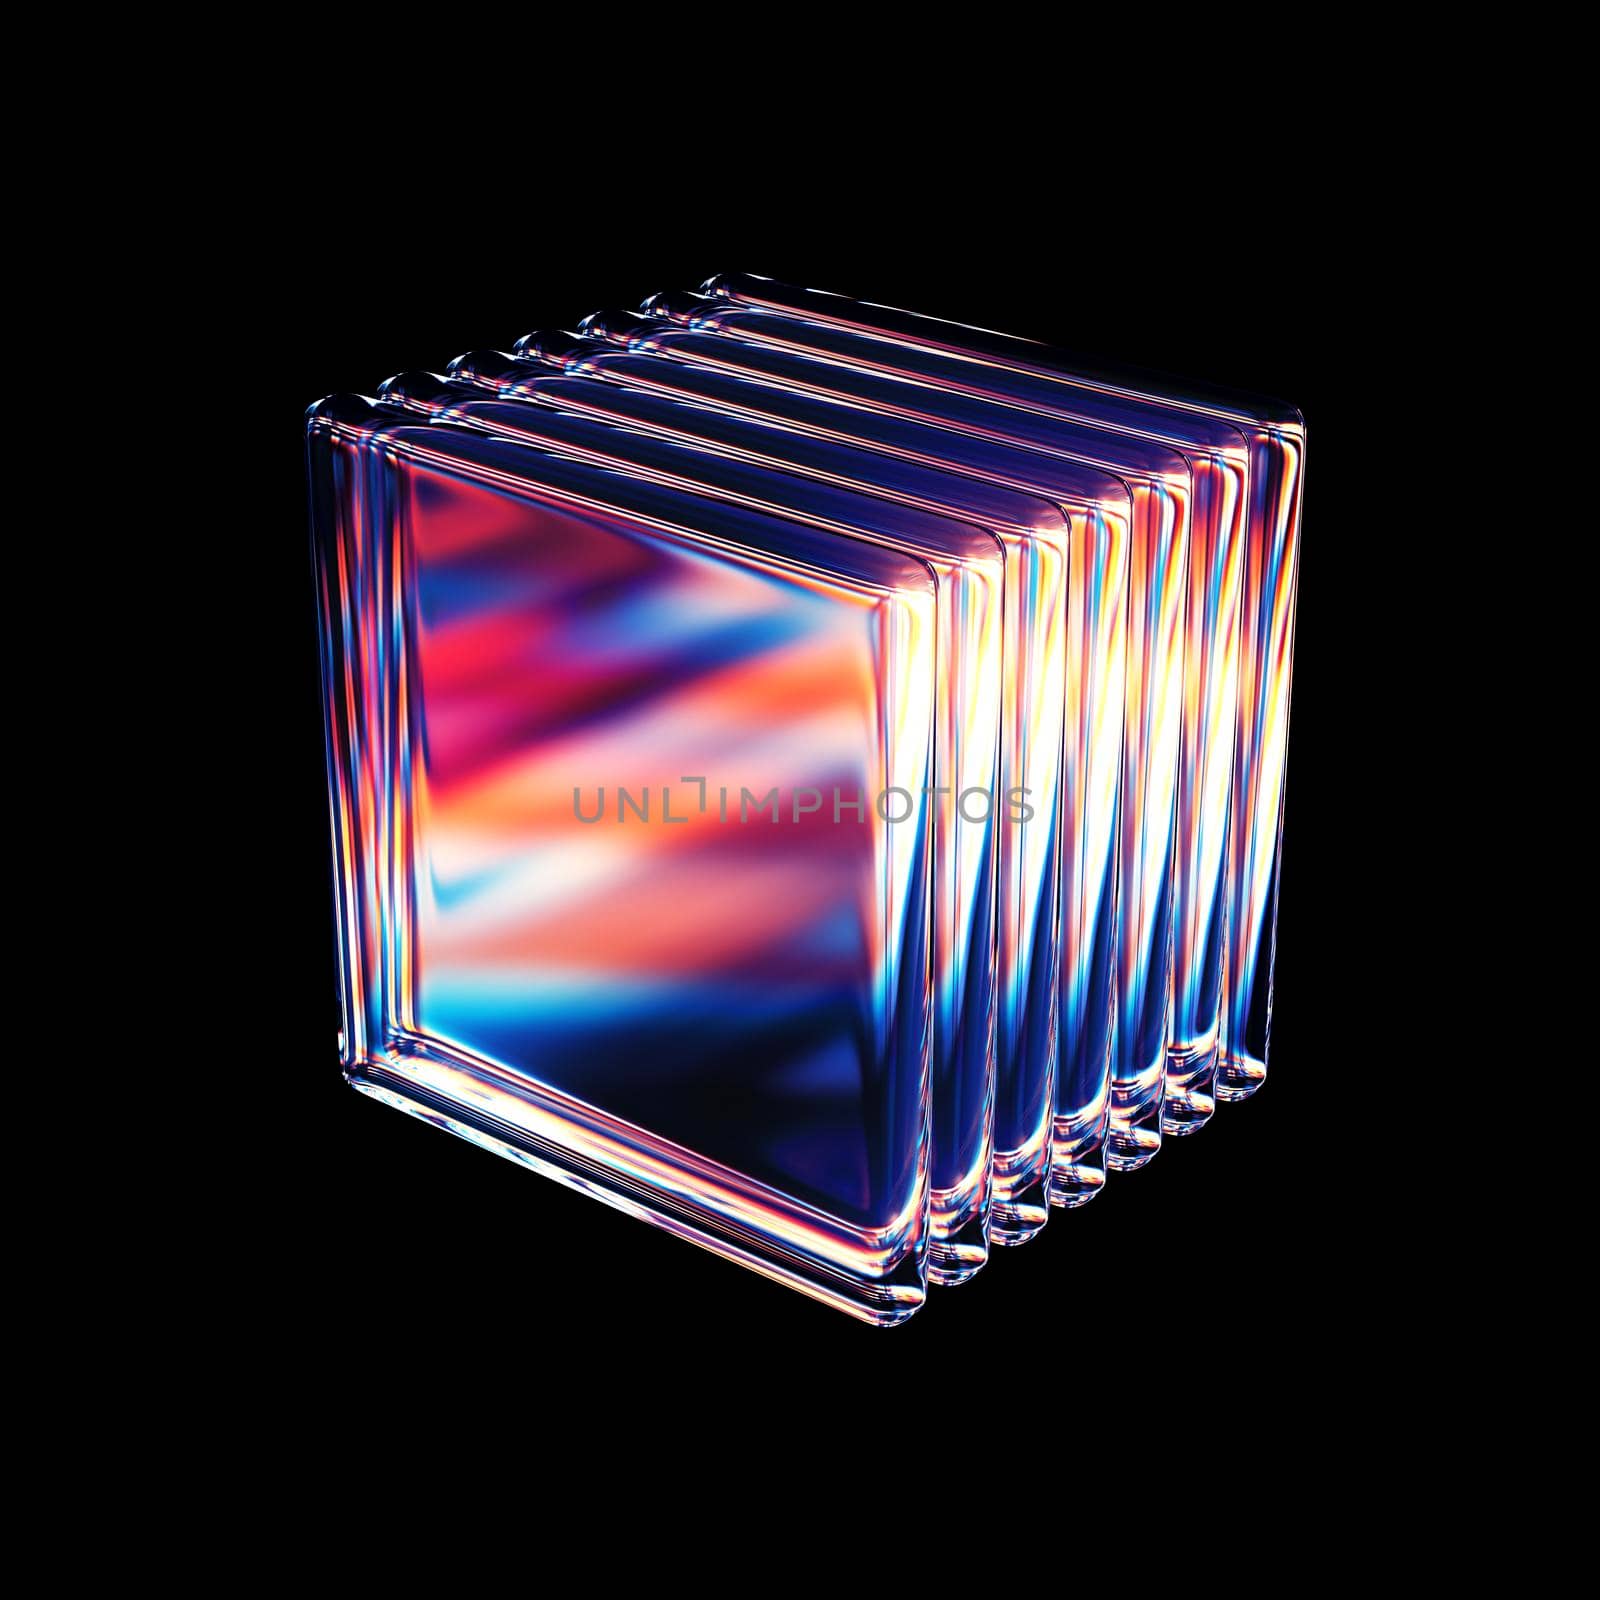 3d rendered abstract glass rectangles. Detailed reflection and dispersion